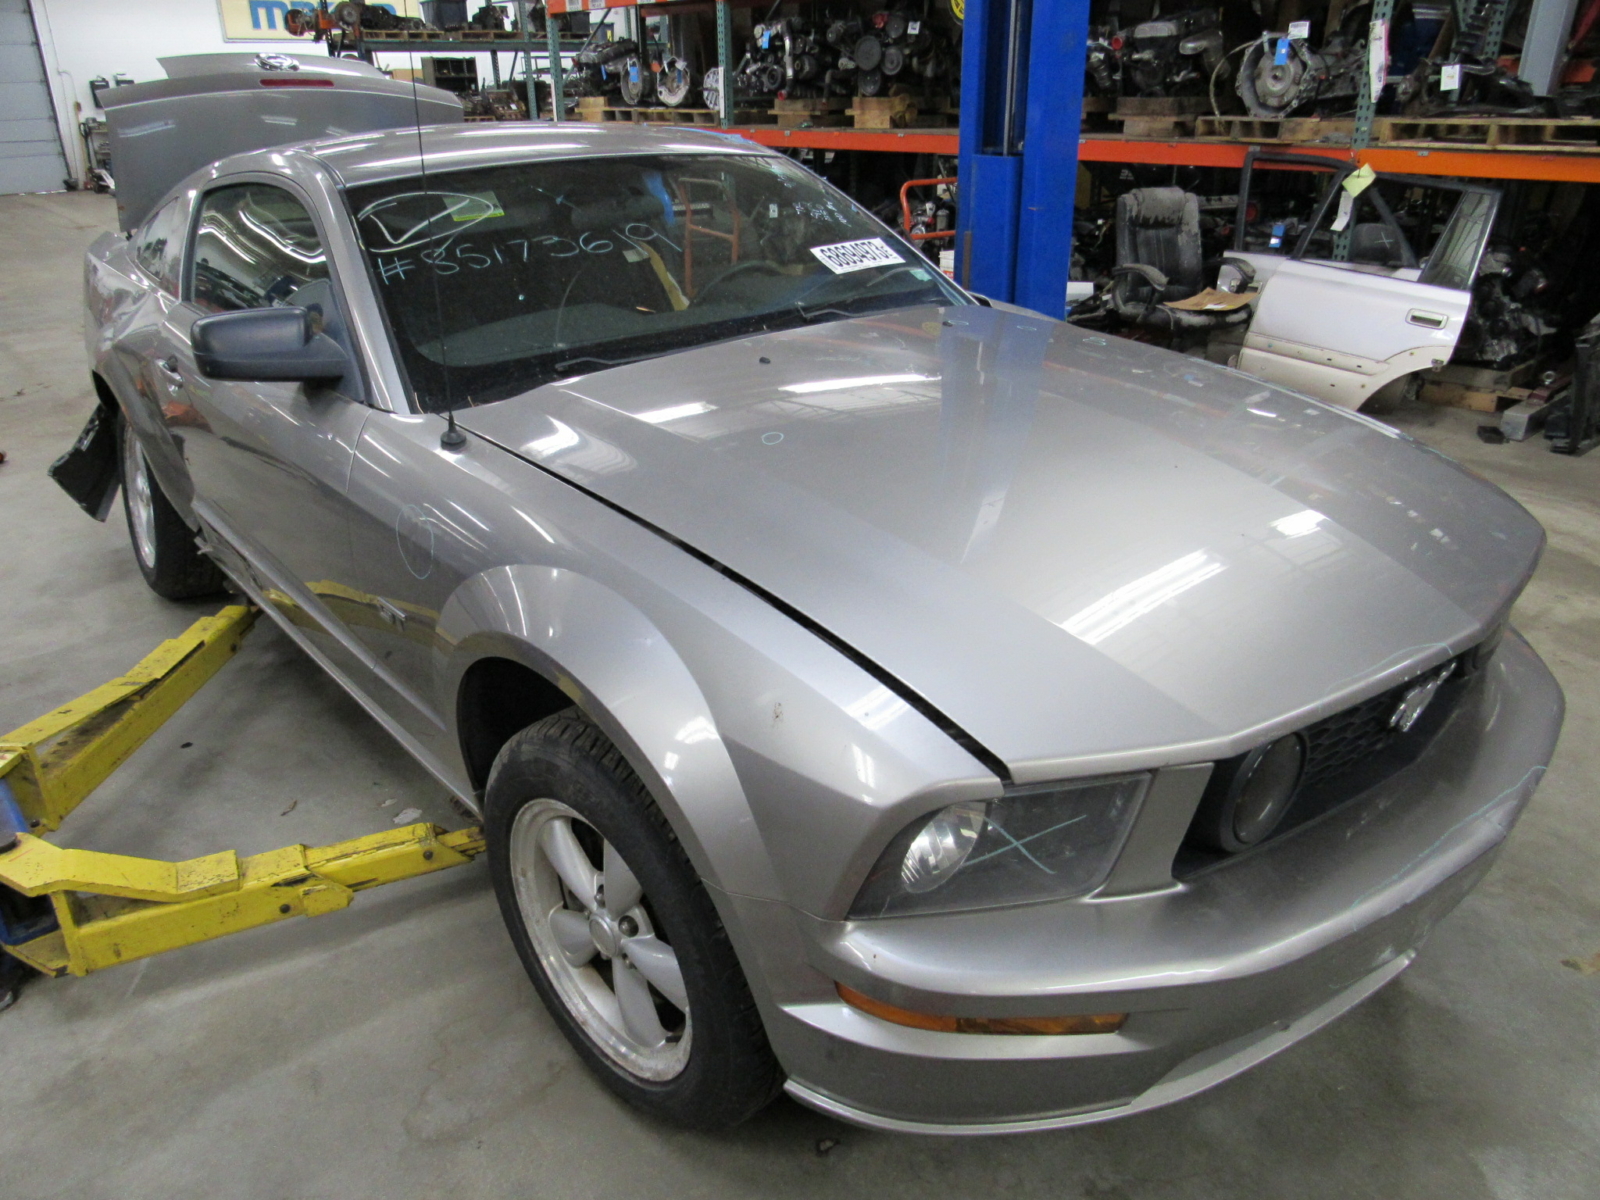 08 Ford Mustang GT 4.6L 3V V8 5-Speed Manual In For Parts 1-8-24